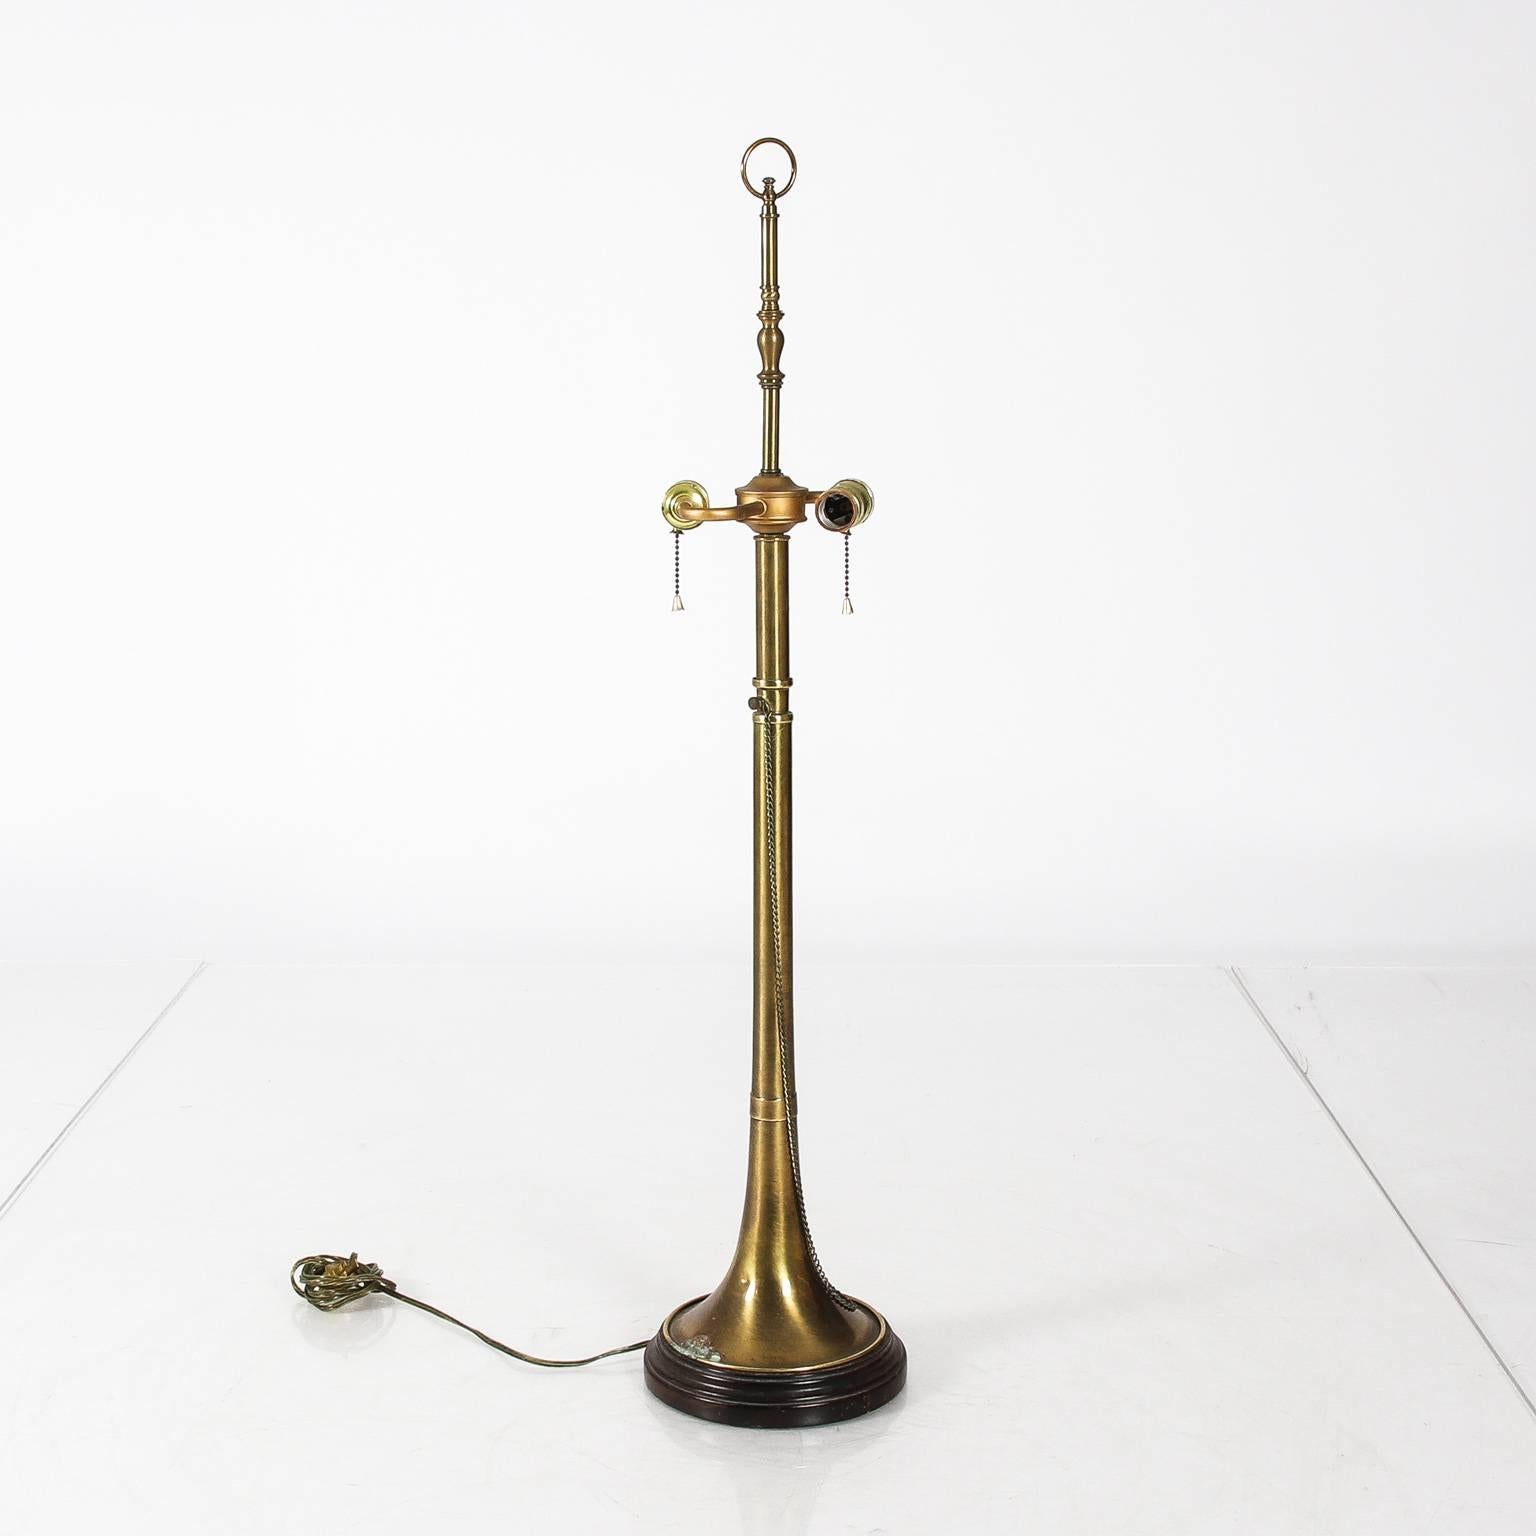 Pair of brass trumpets converted to lamps, circa 20th century.
     